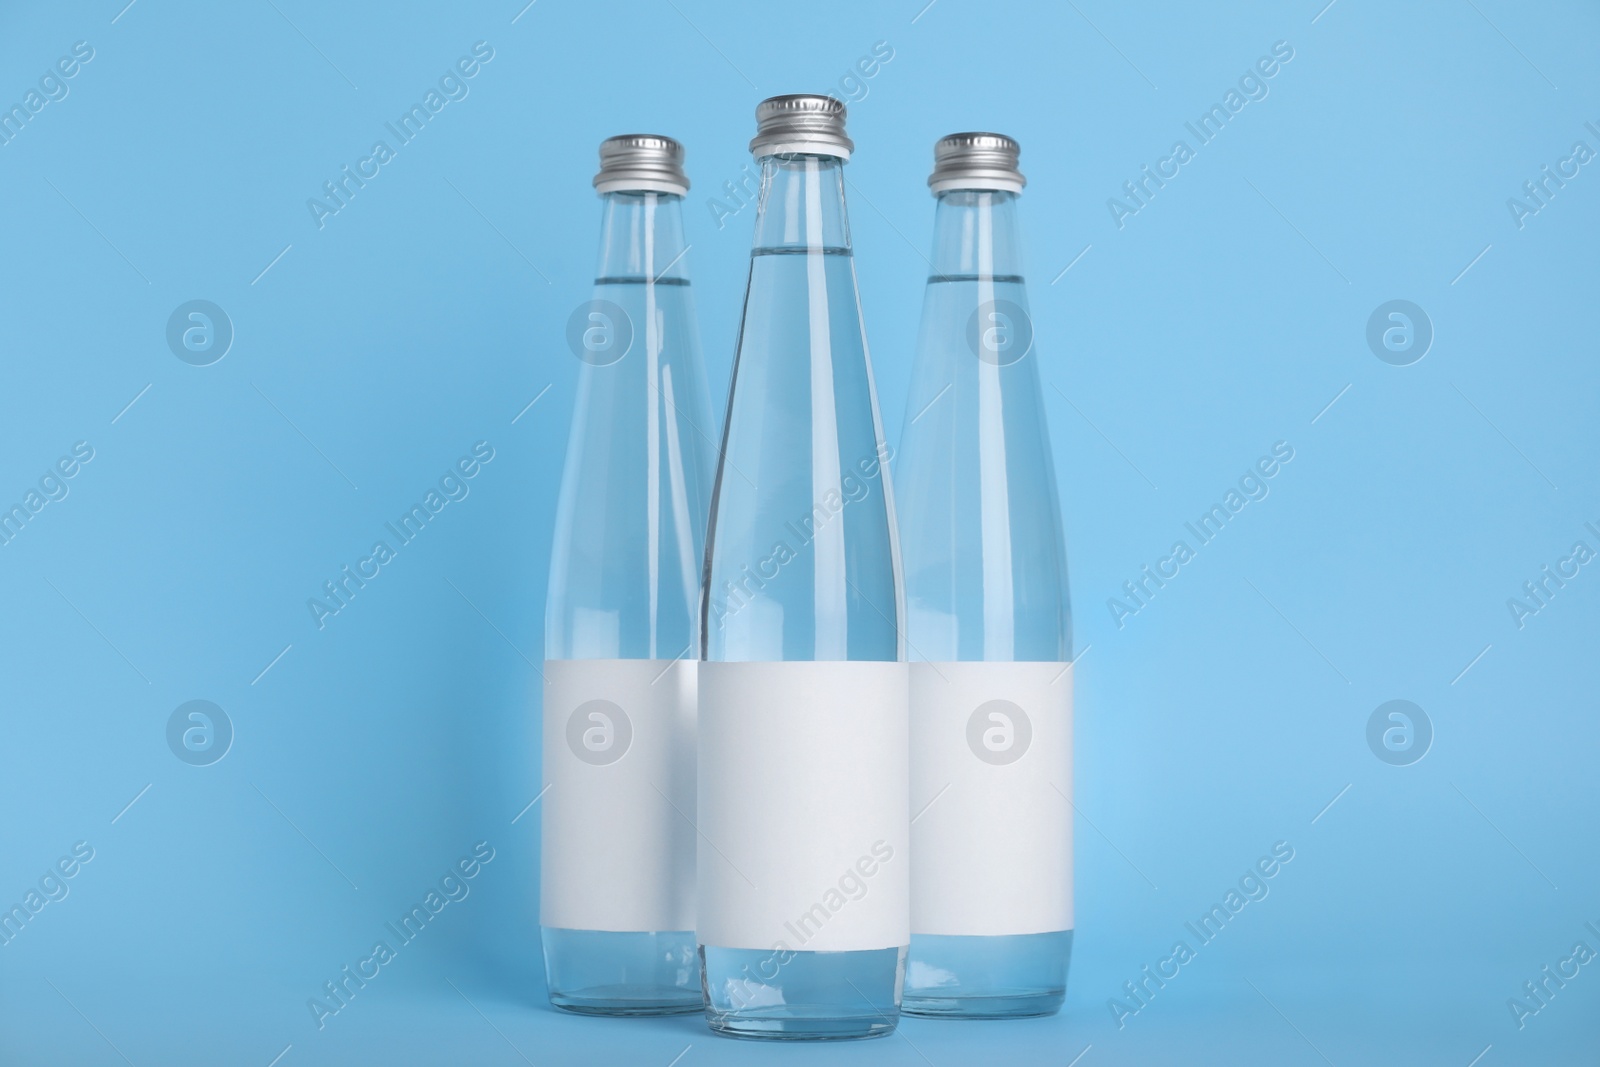 Photo of Glass bottles with soda water on light blue background